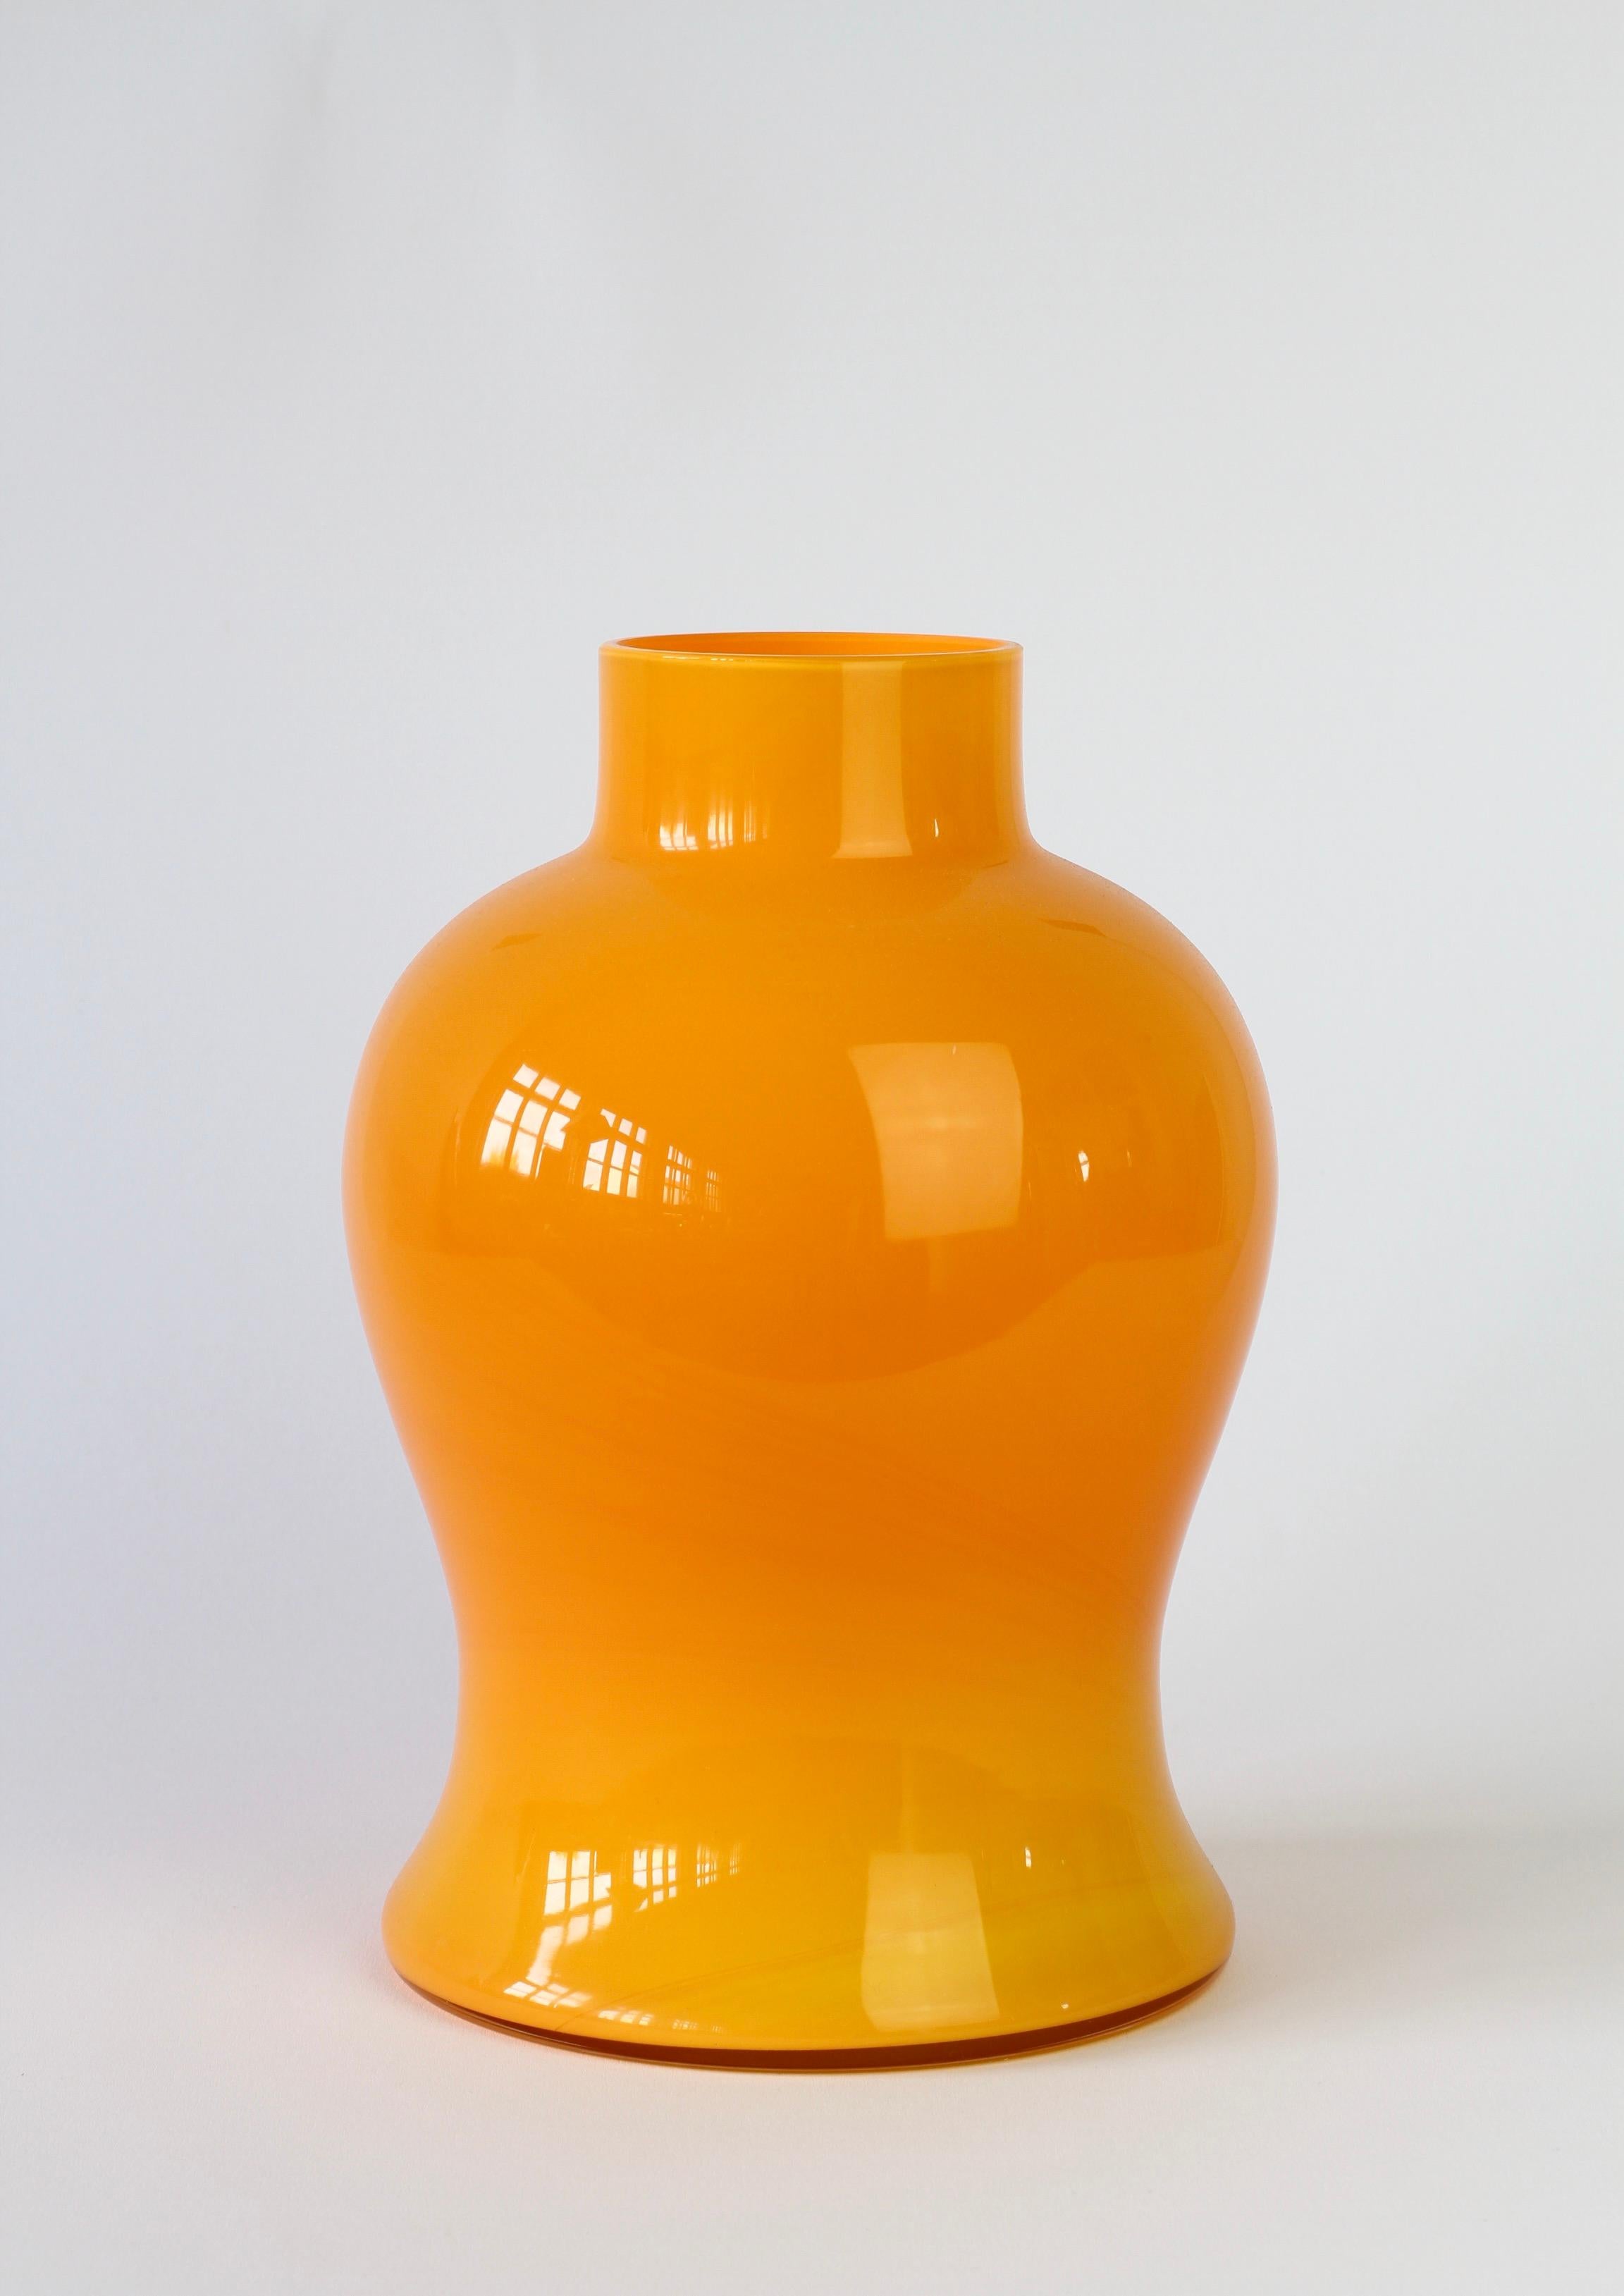 Cenedese bright orange Murano glass vase or vessel, made in Italy. Particularly striking is the form, as it has the characteristics of hand thrown pottery with the unmistakable look and feel of glass.

A fun, funky and bright way to add a touch of